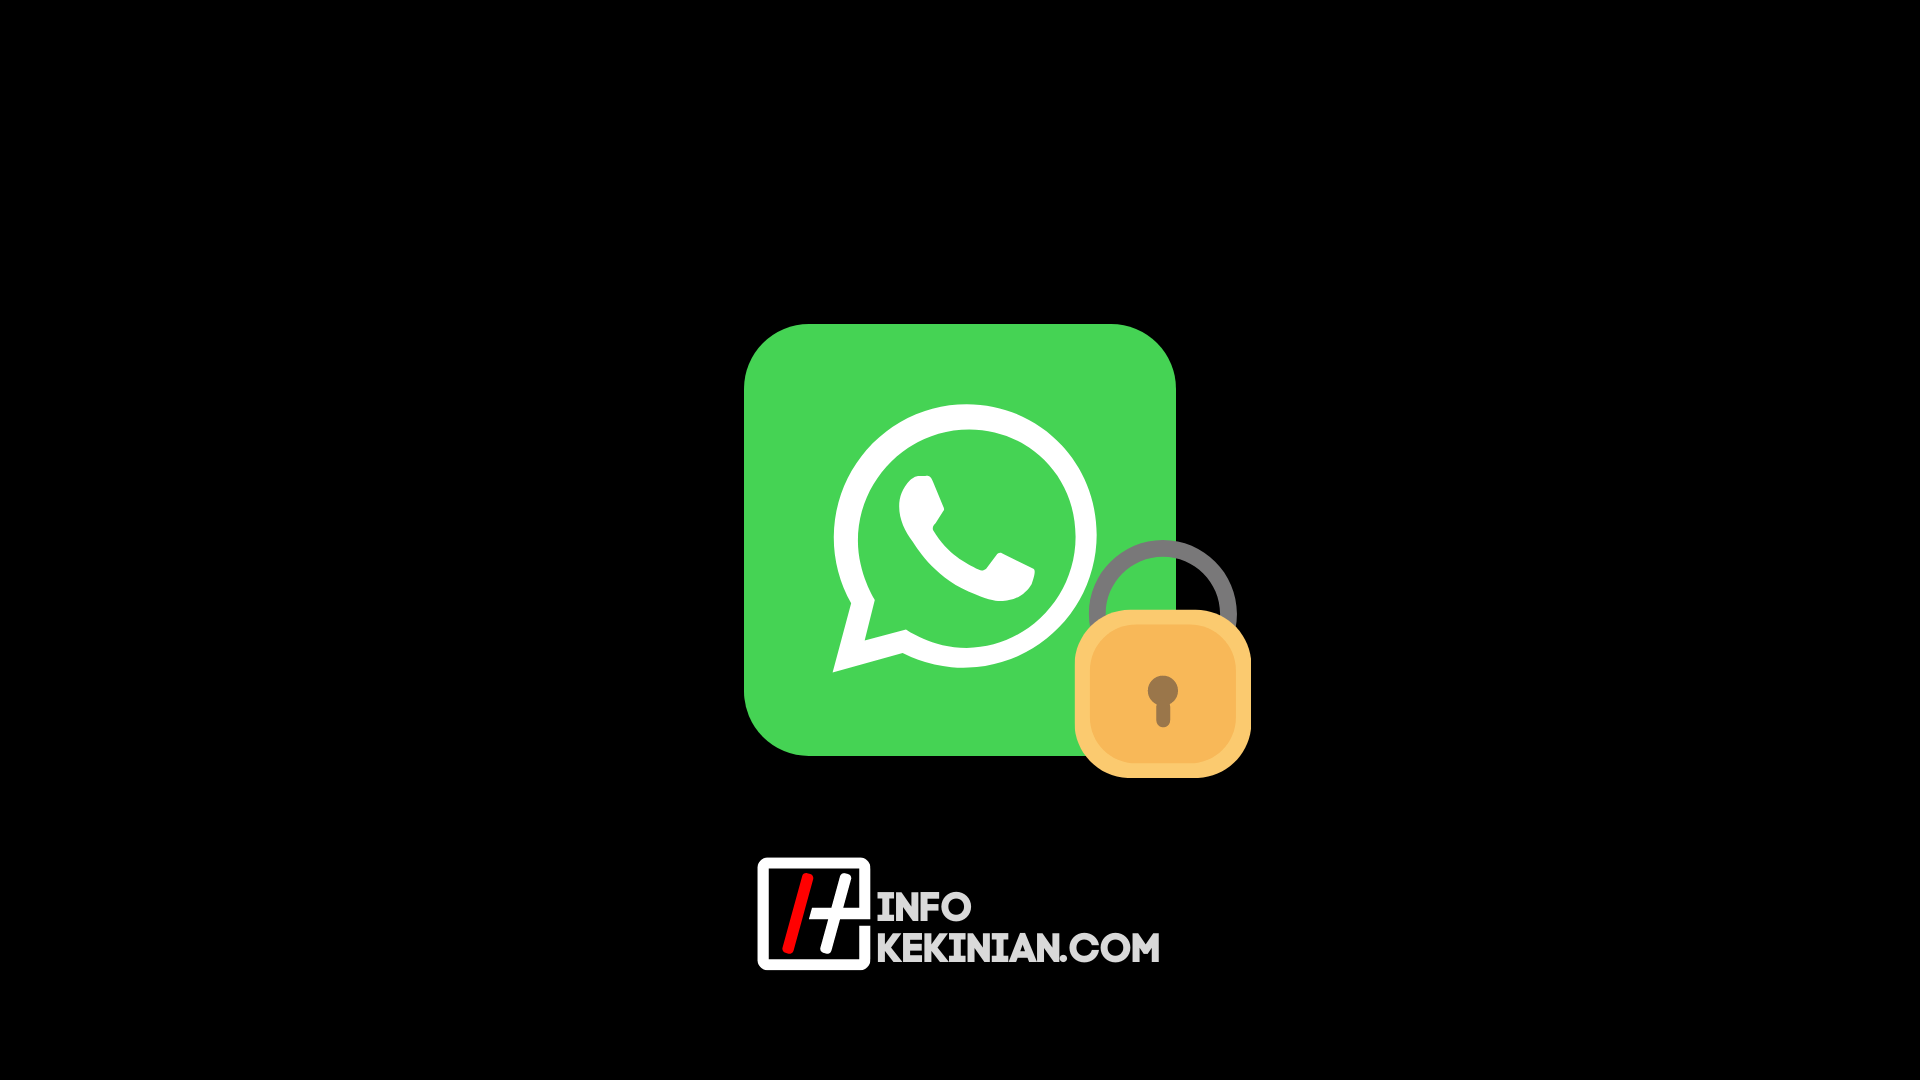 How to Maintain Privacy Security on WhatsApp